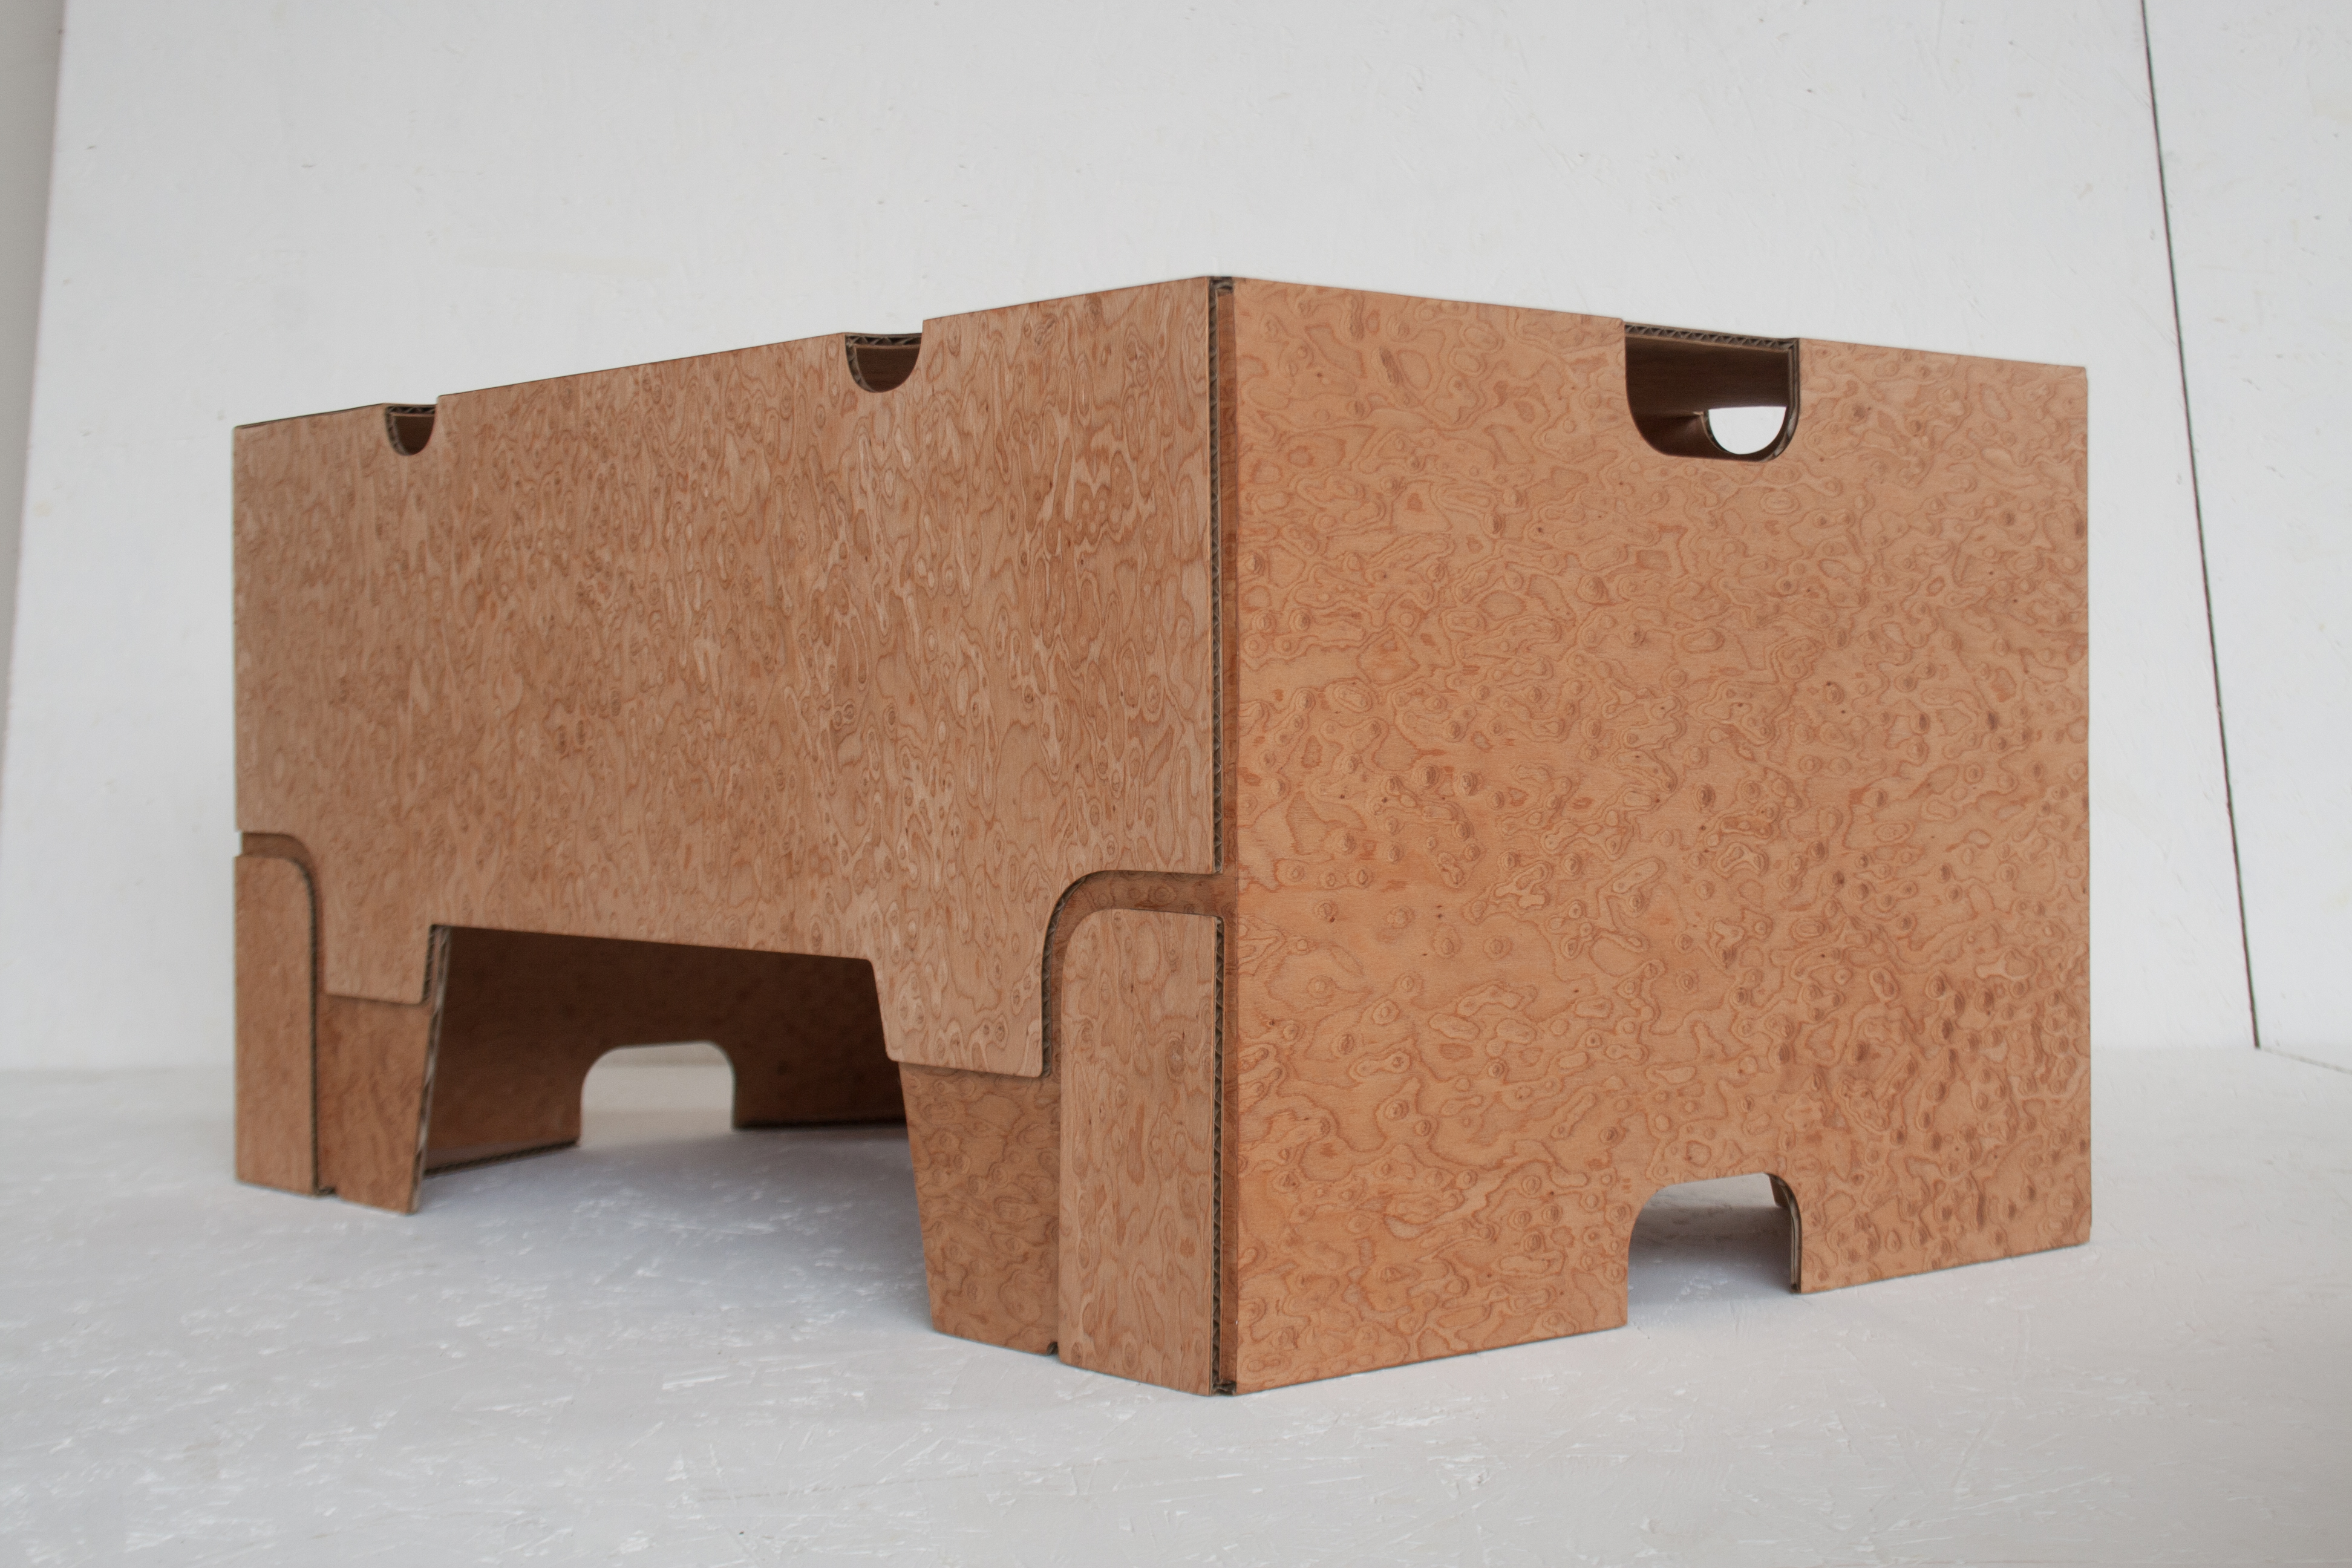 A cardboard box transformed into a table. Designed by Jarle Veldman